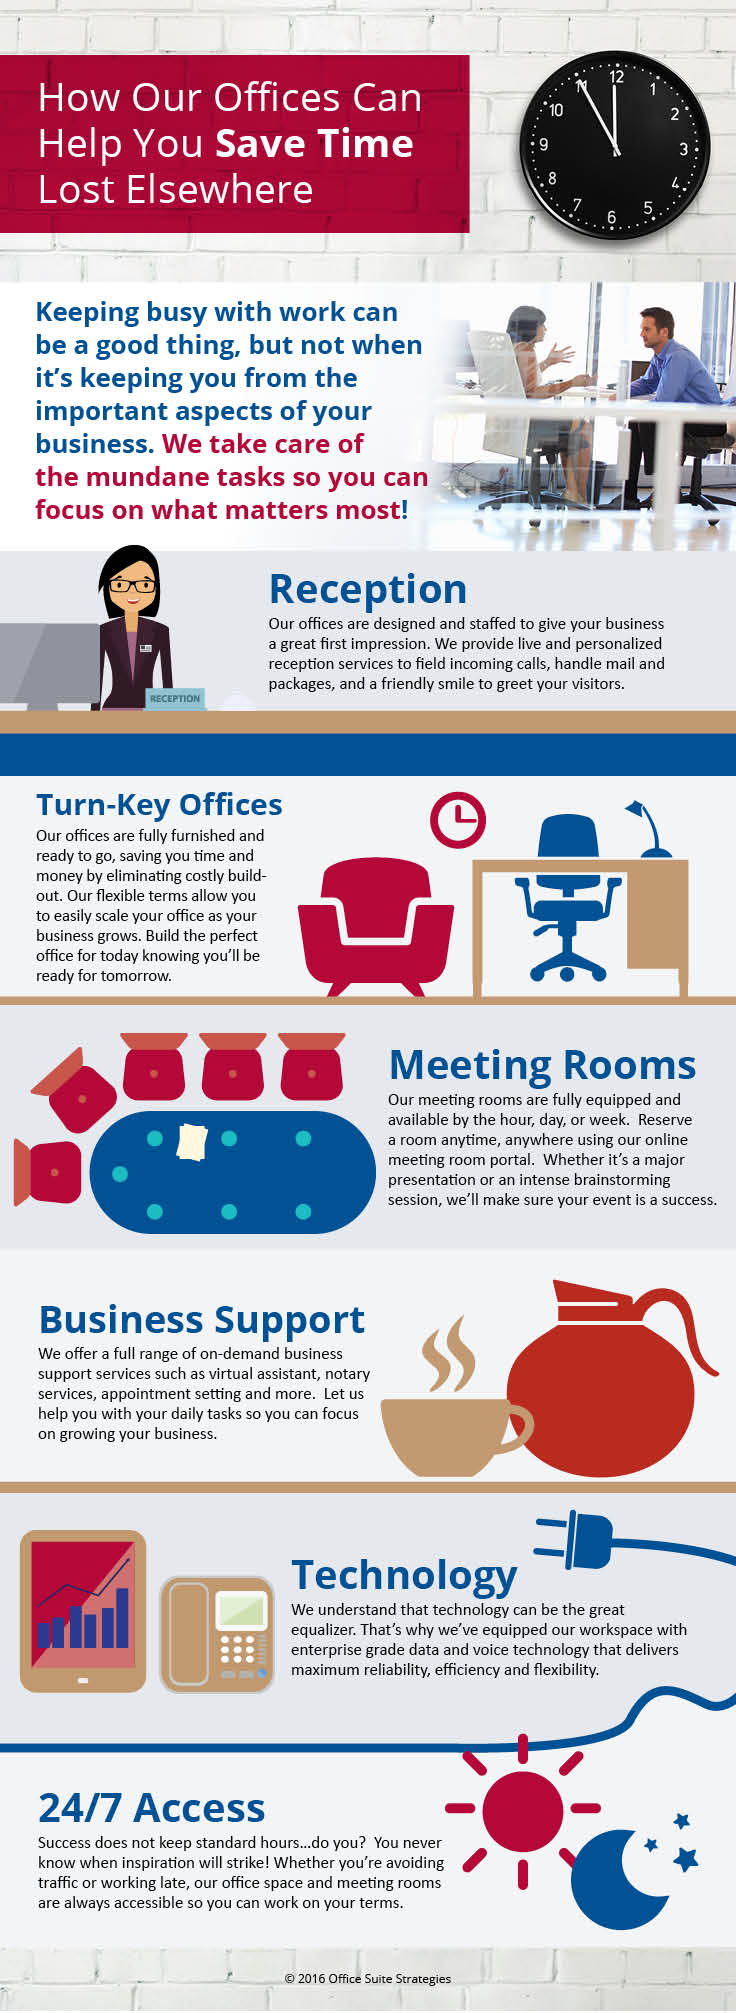 Saving Time For Your Business With Our Lakeside Office Services